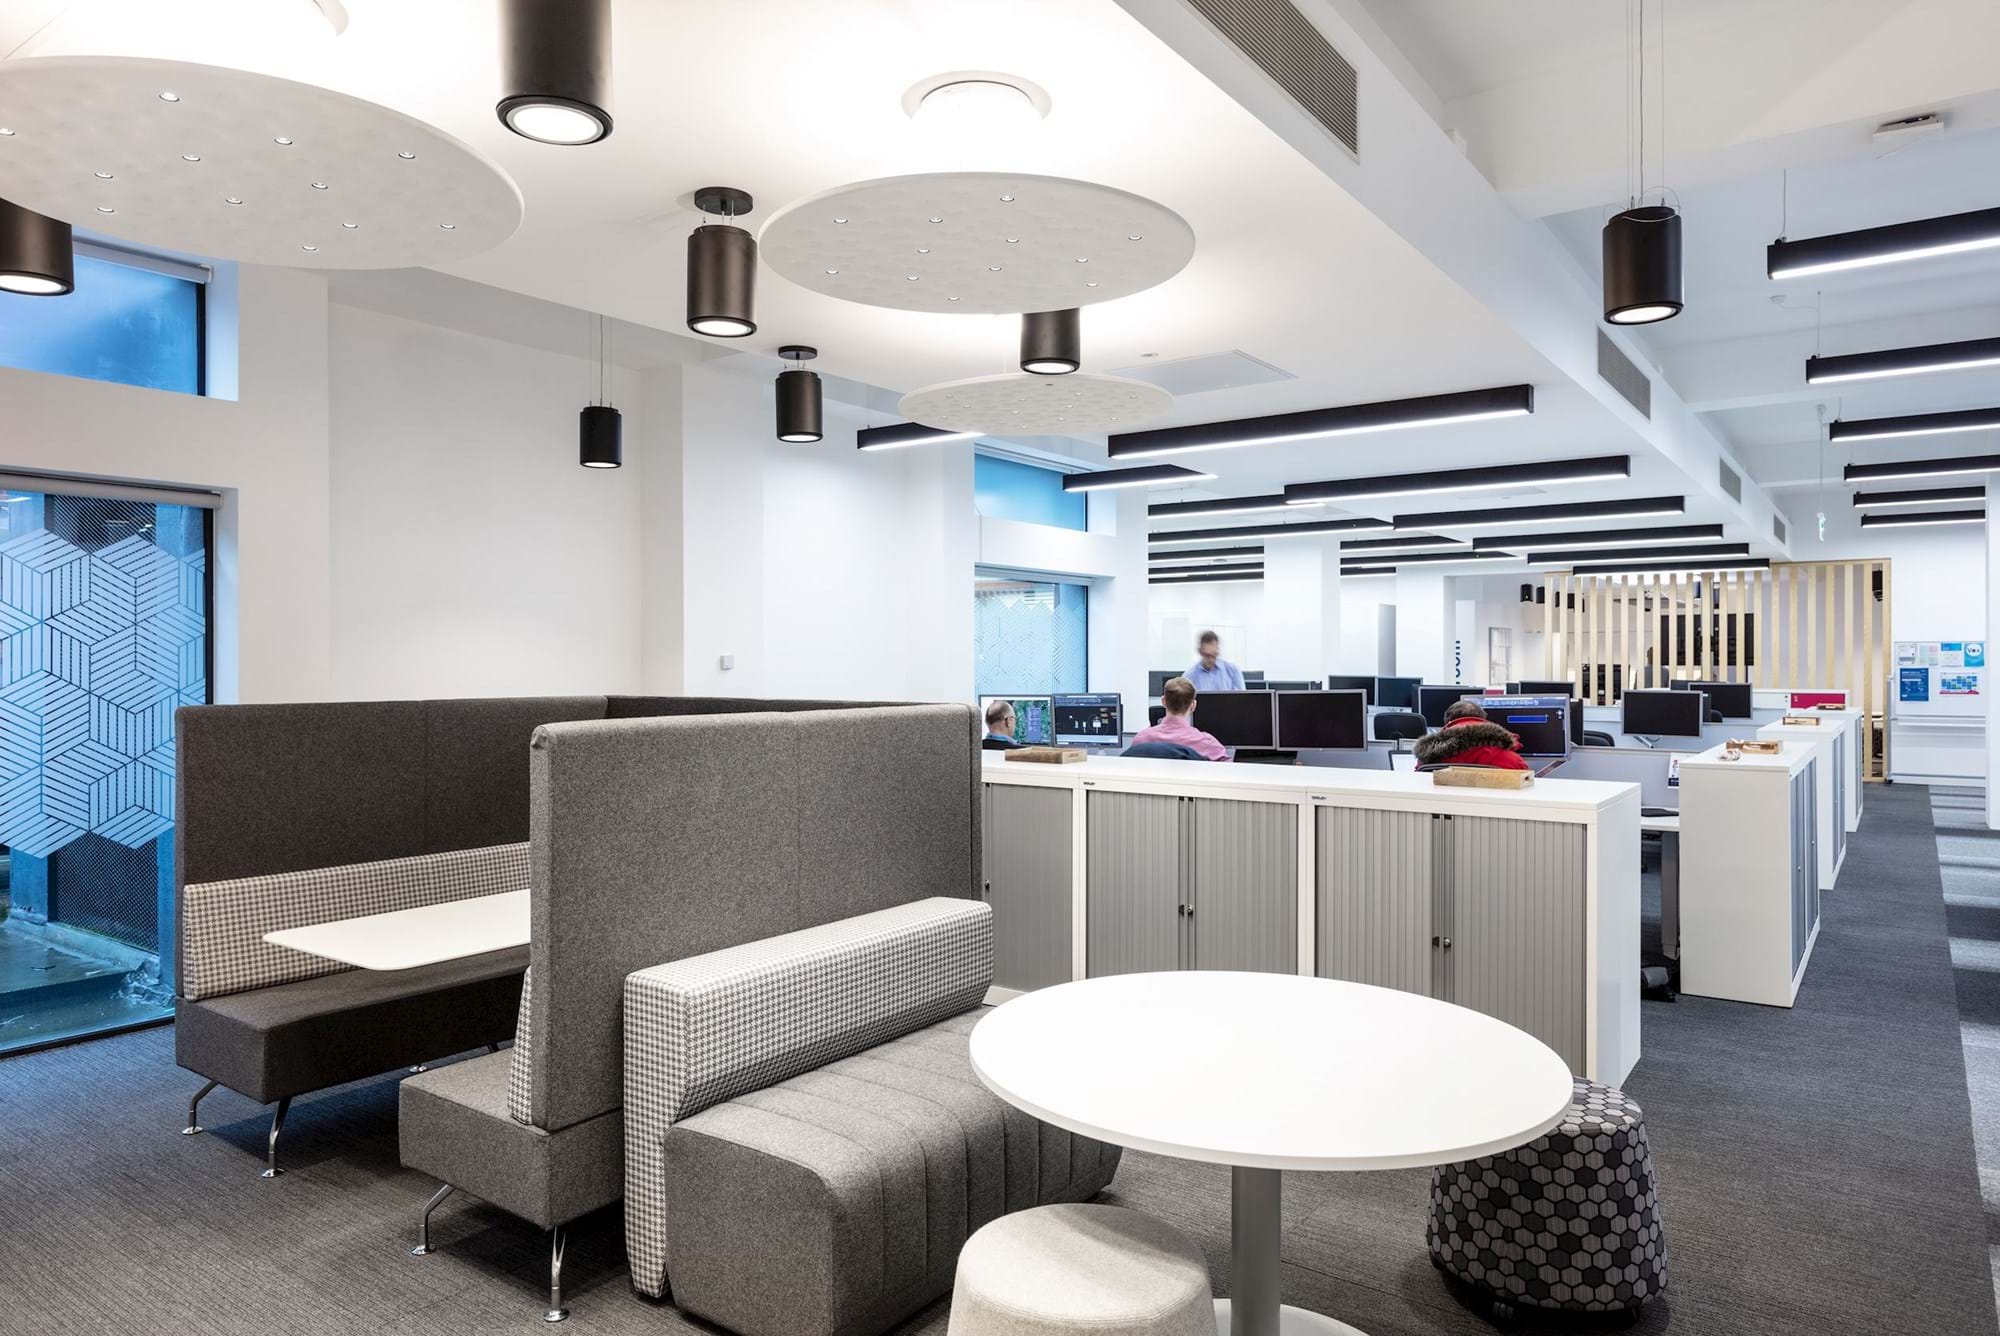 Modus Workspace office design, fit out and refurbishment - Atkins Manchester - Modus_Atkins-15.jpg